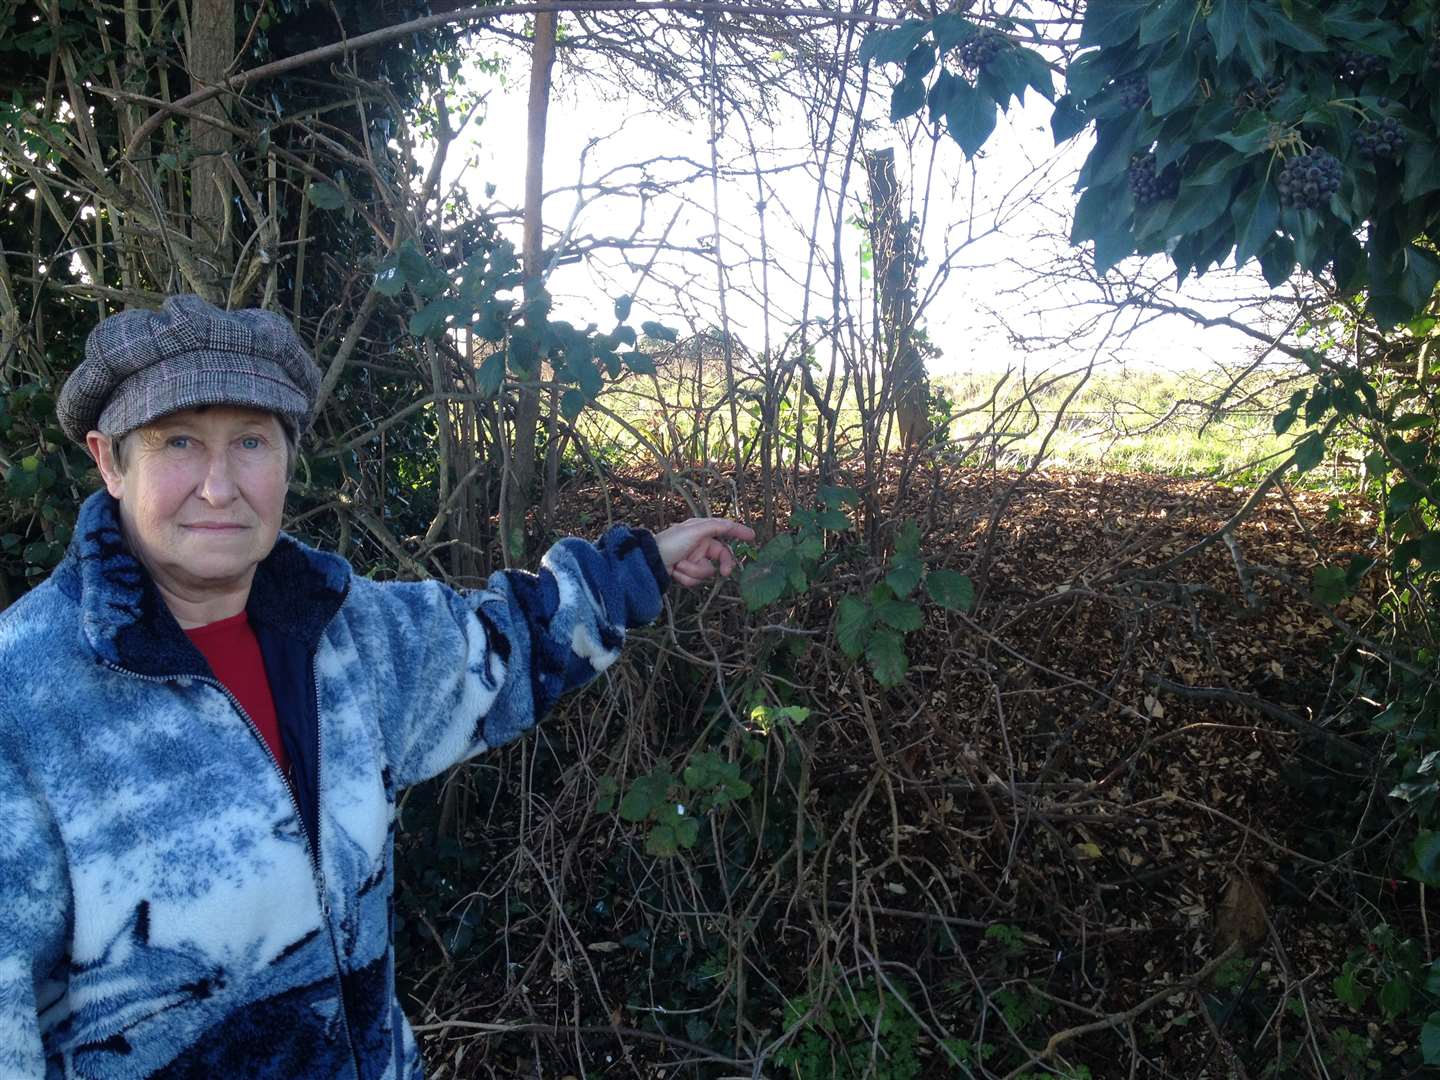 Janet Anning of Northboure Road in Great Mongeham thinks the flytipping is unfair